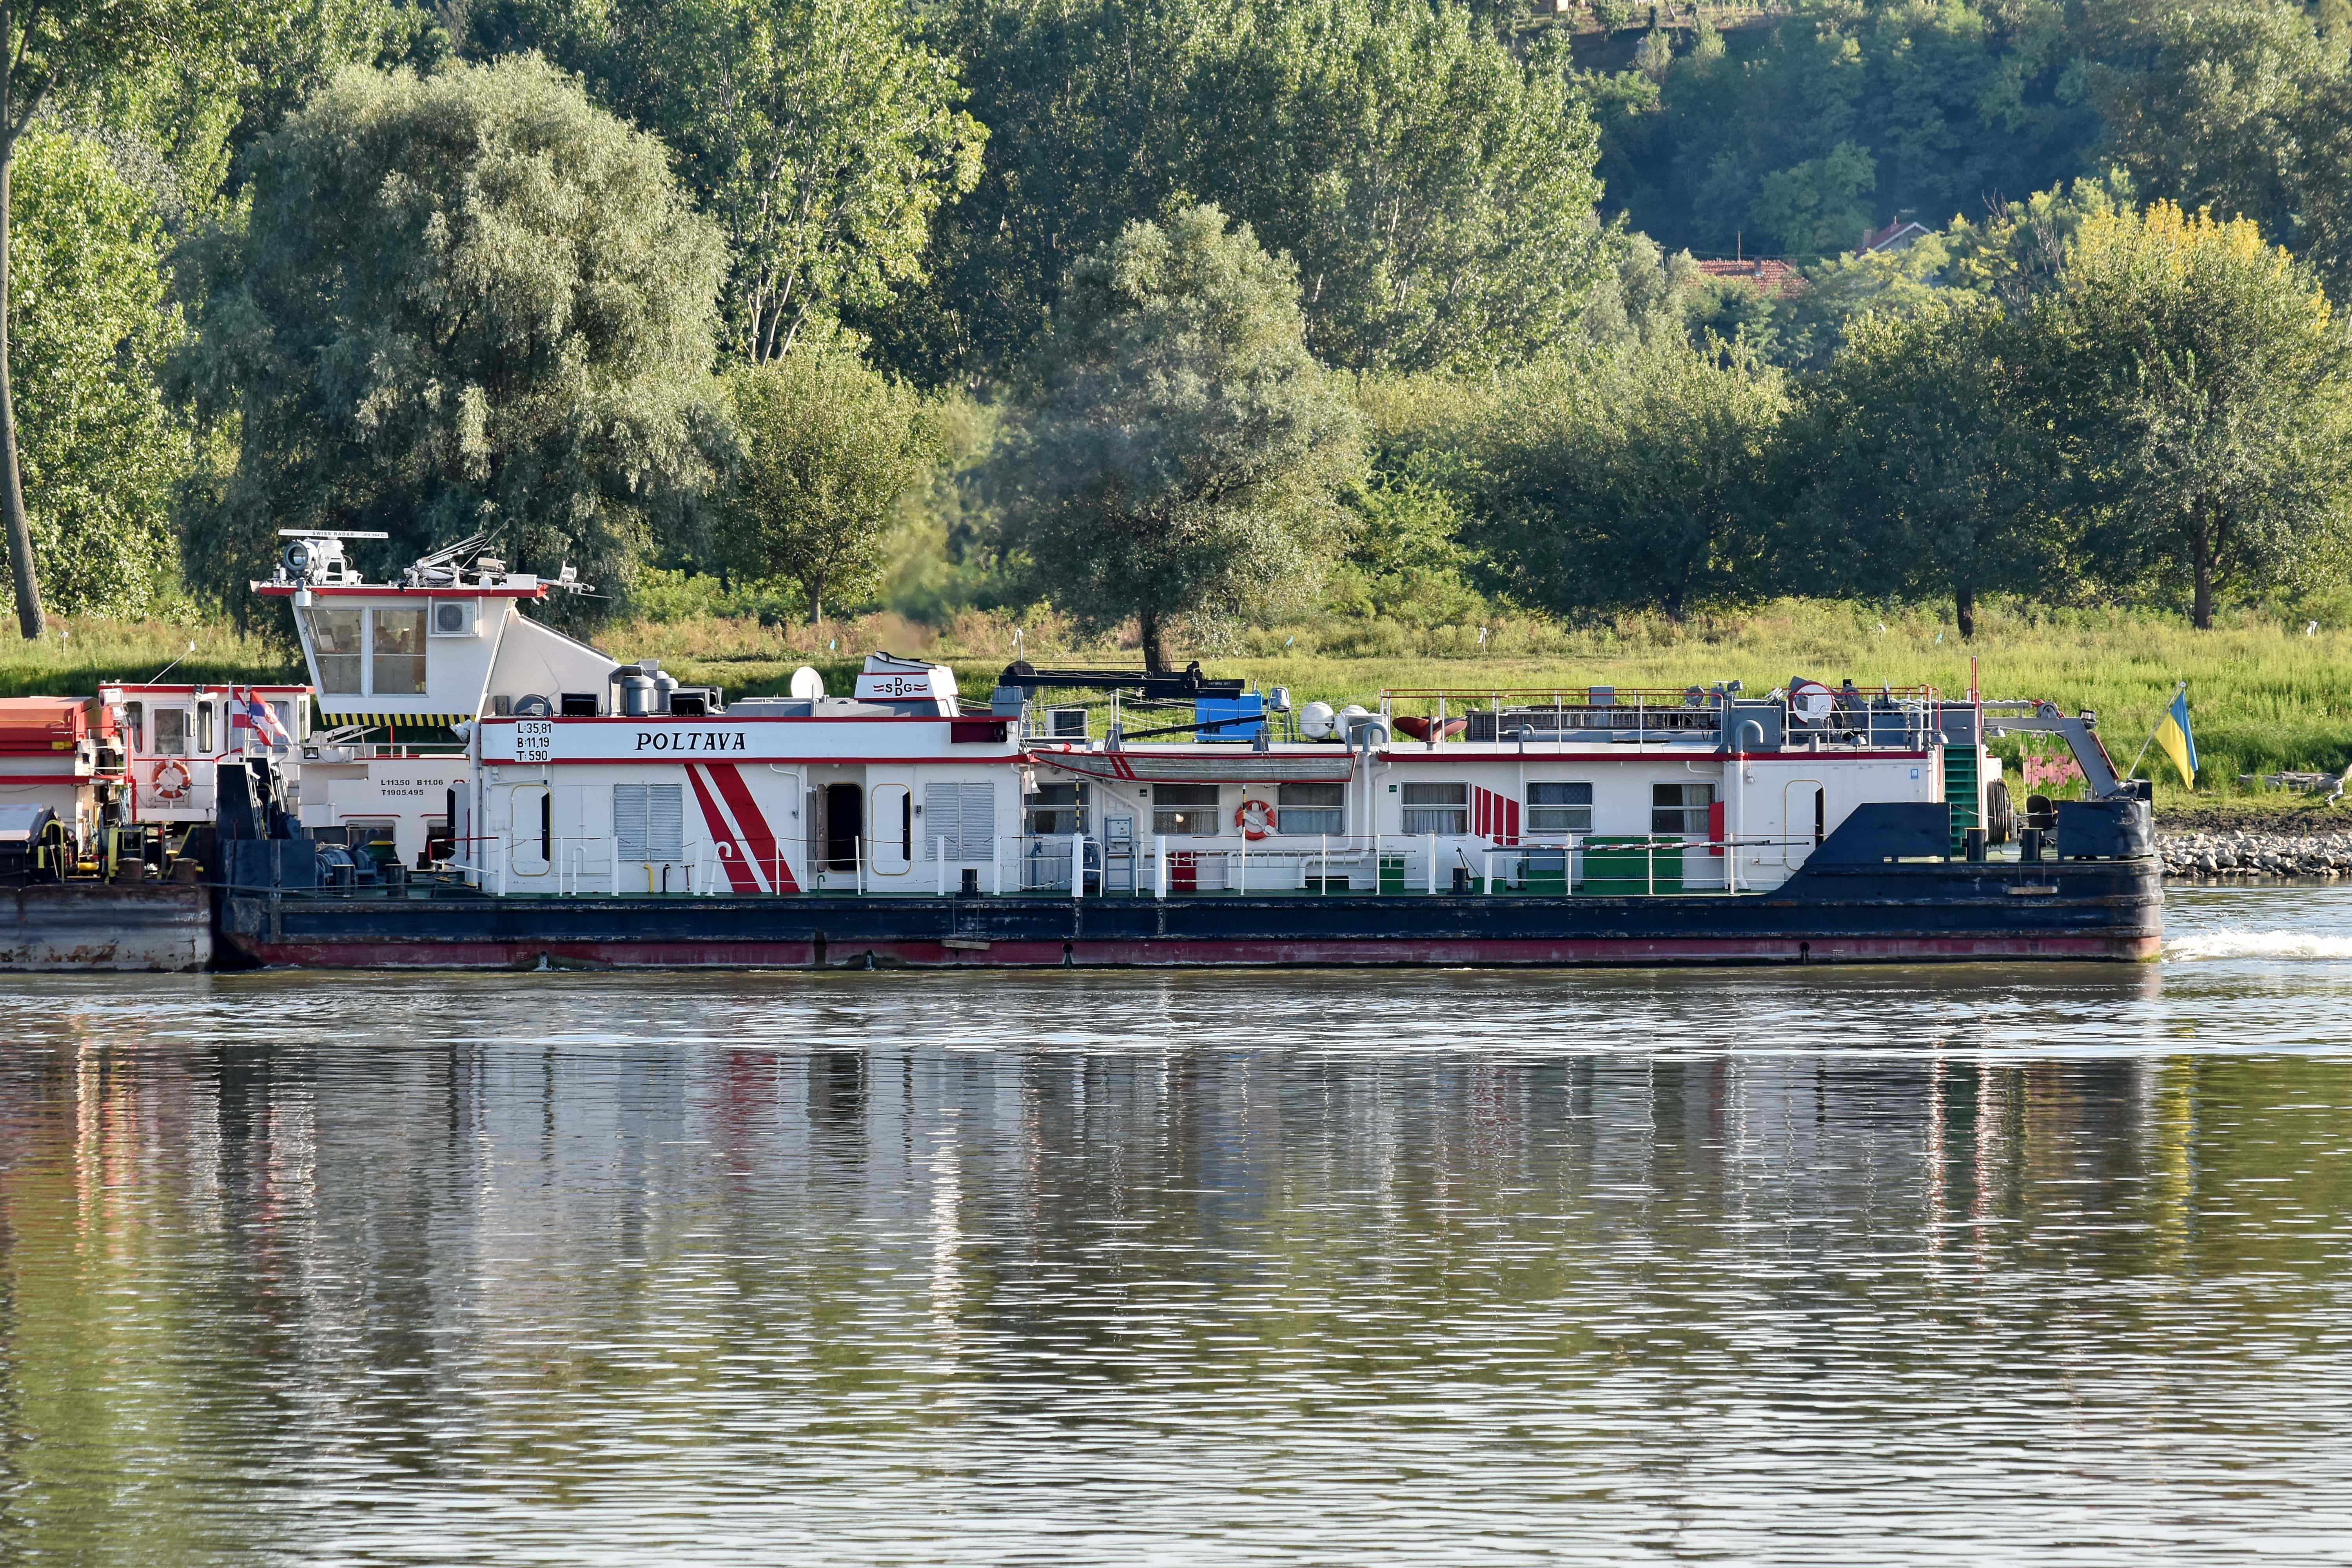 Free picture: barge, cargo, cargo ship, riverbank, river, water, boat ...